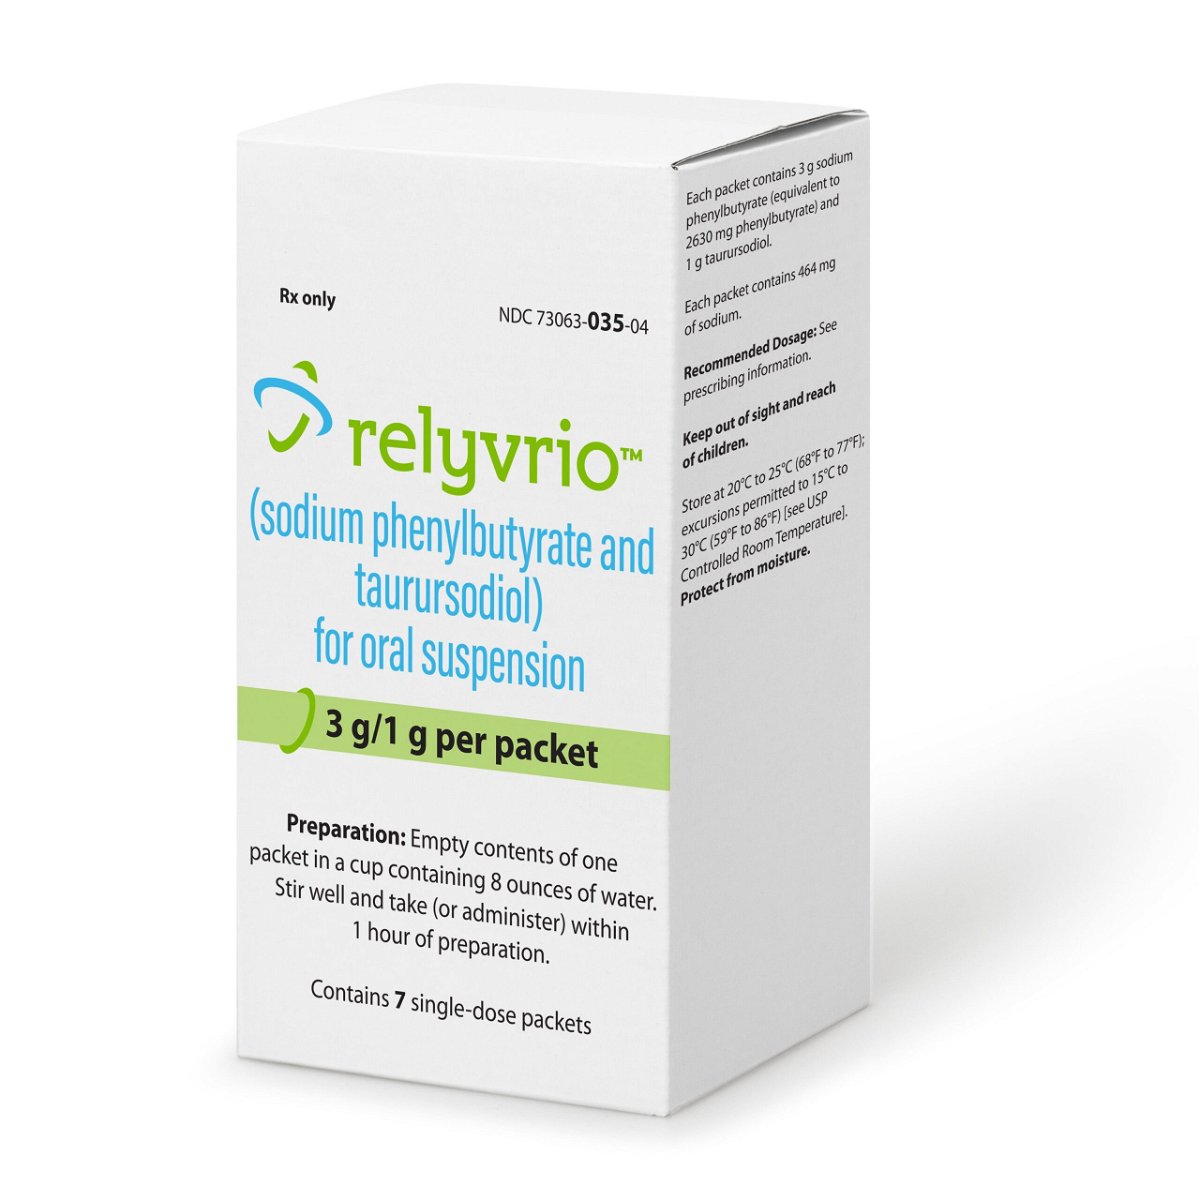 ALS drug Relyvrio withdrawn from market after failed clinical trial